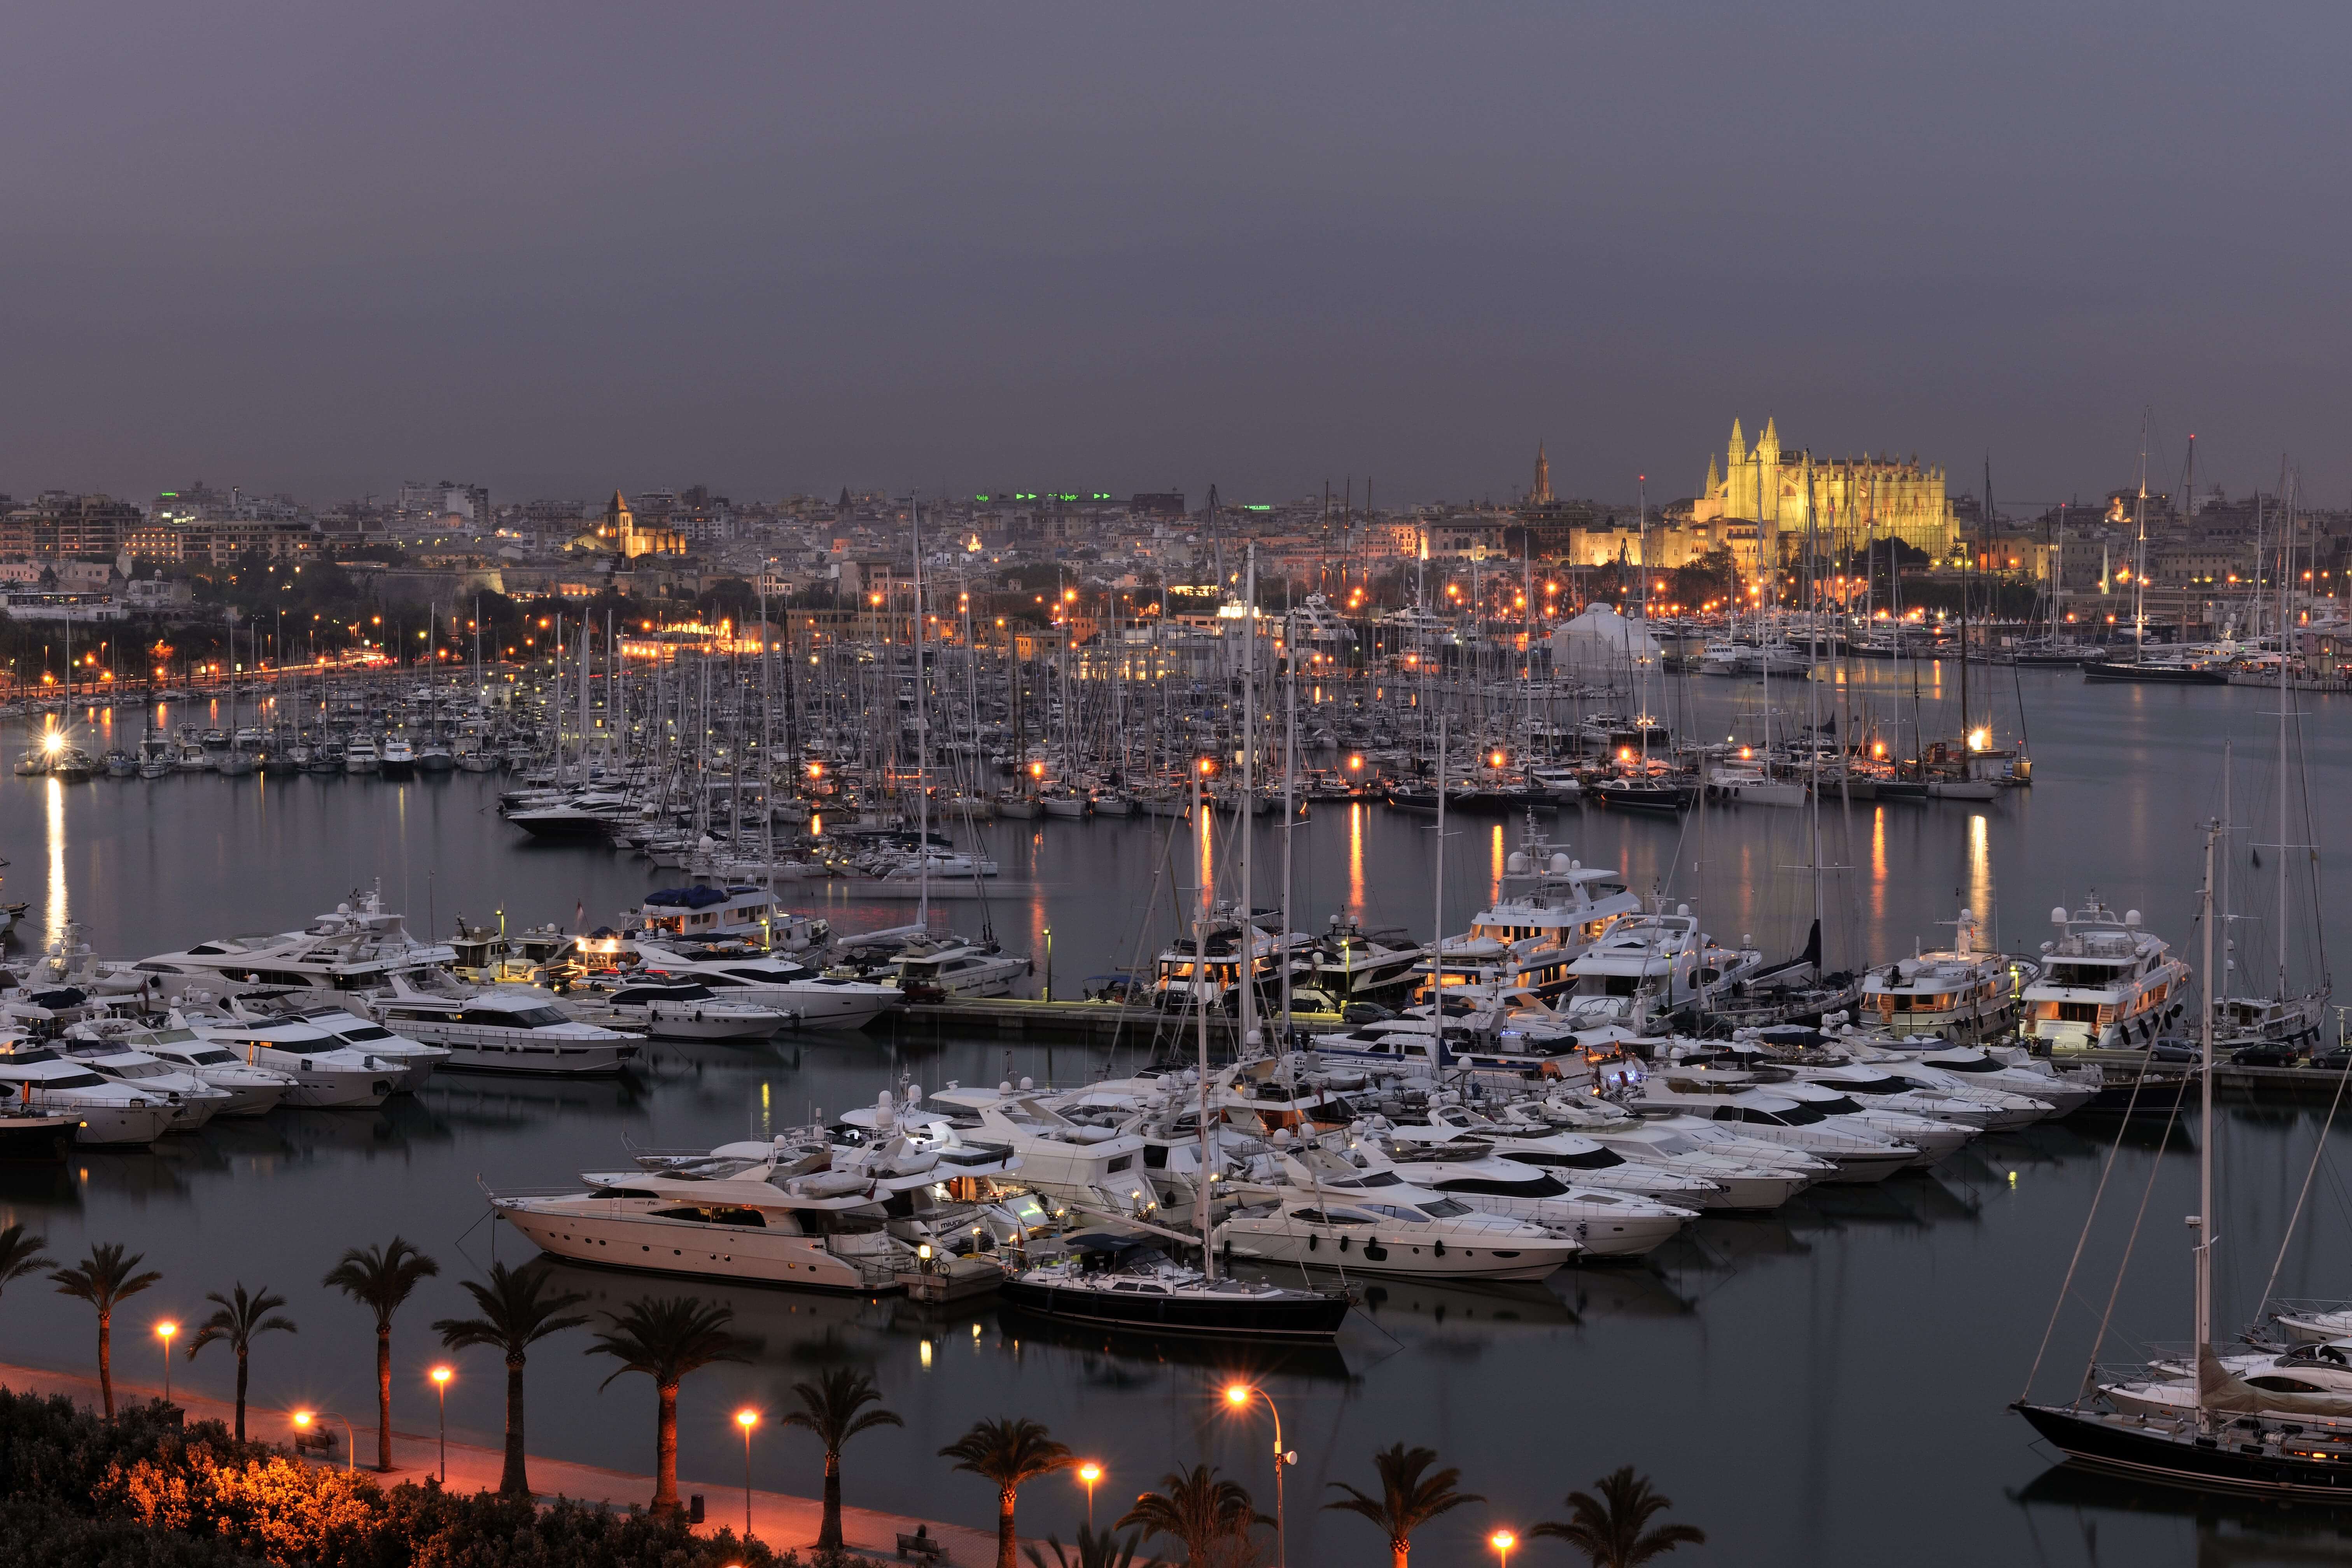 Evening view over the Bay of Palma and Club de Mar with La Seu cathedral in background